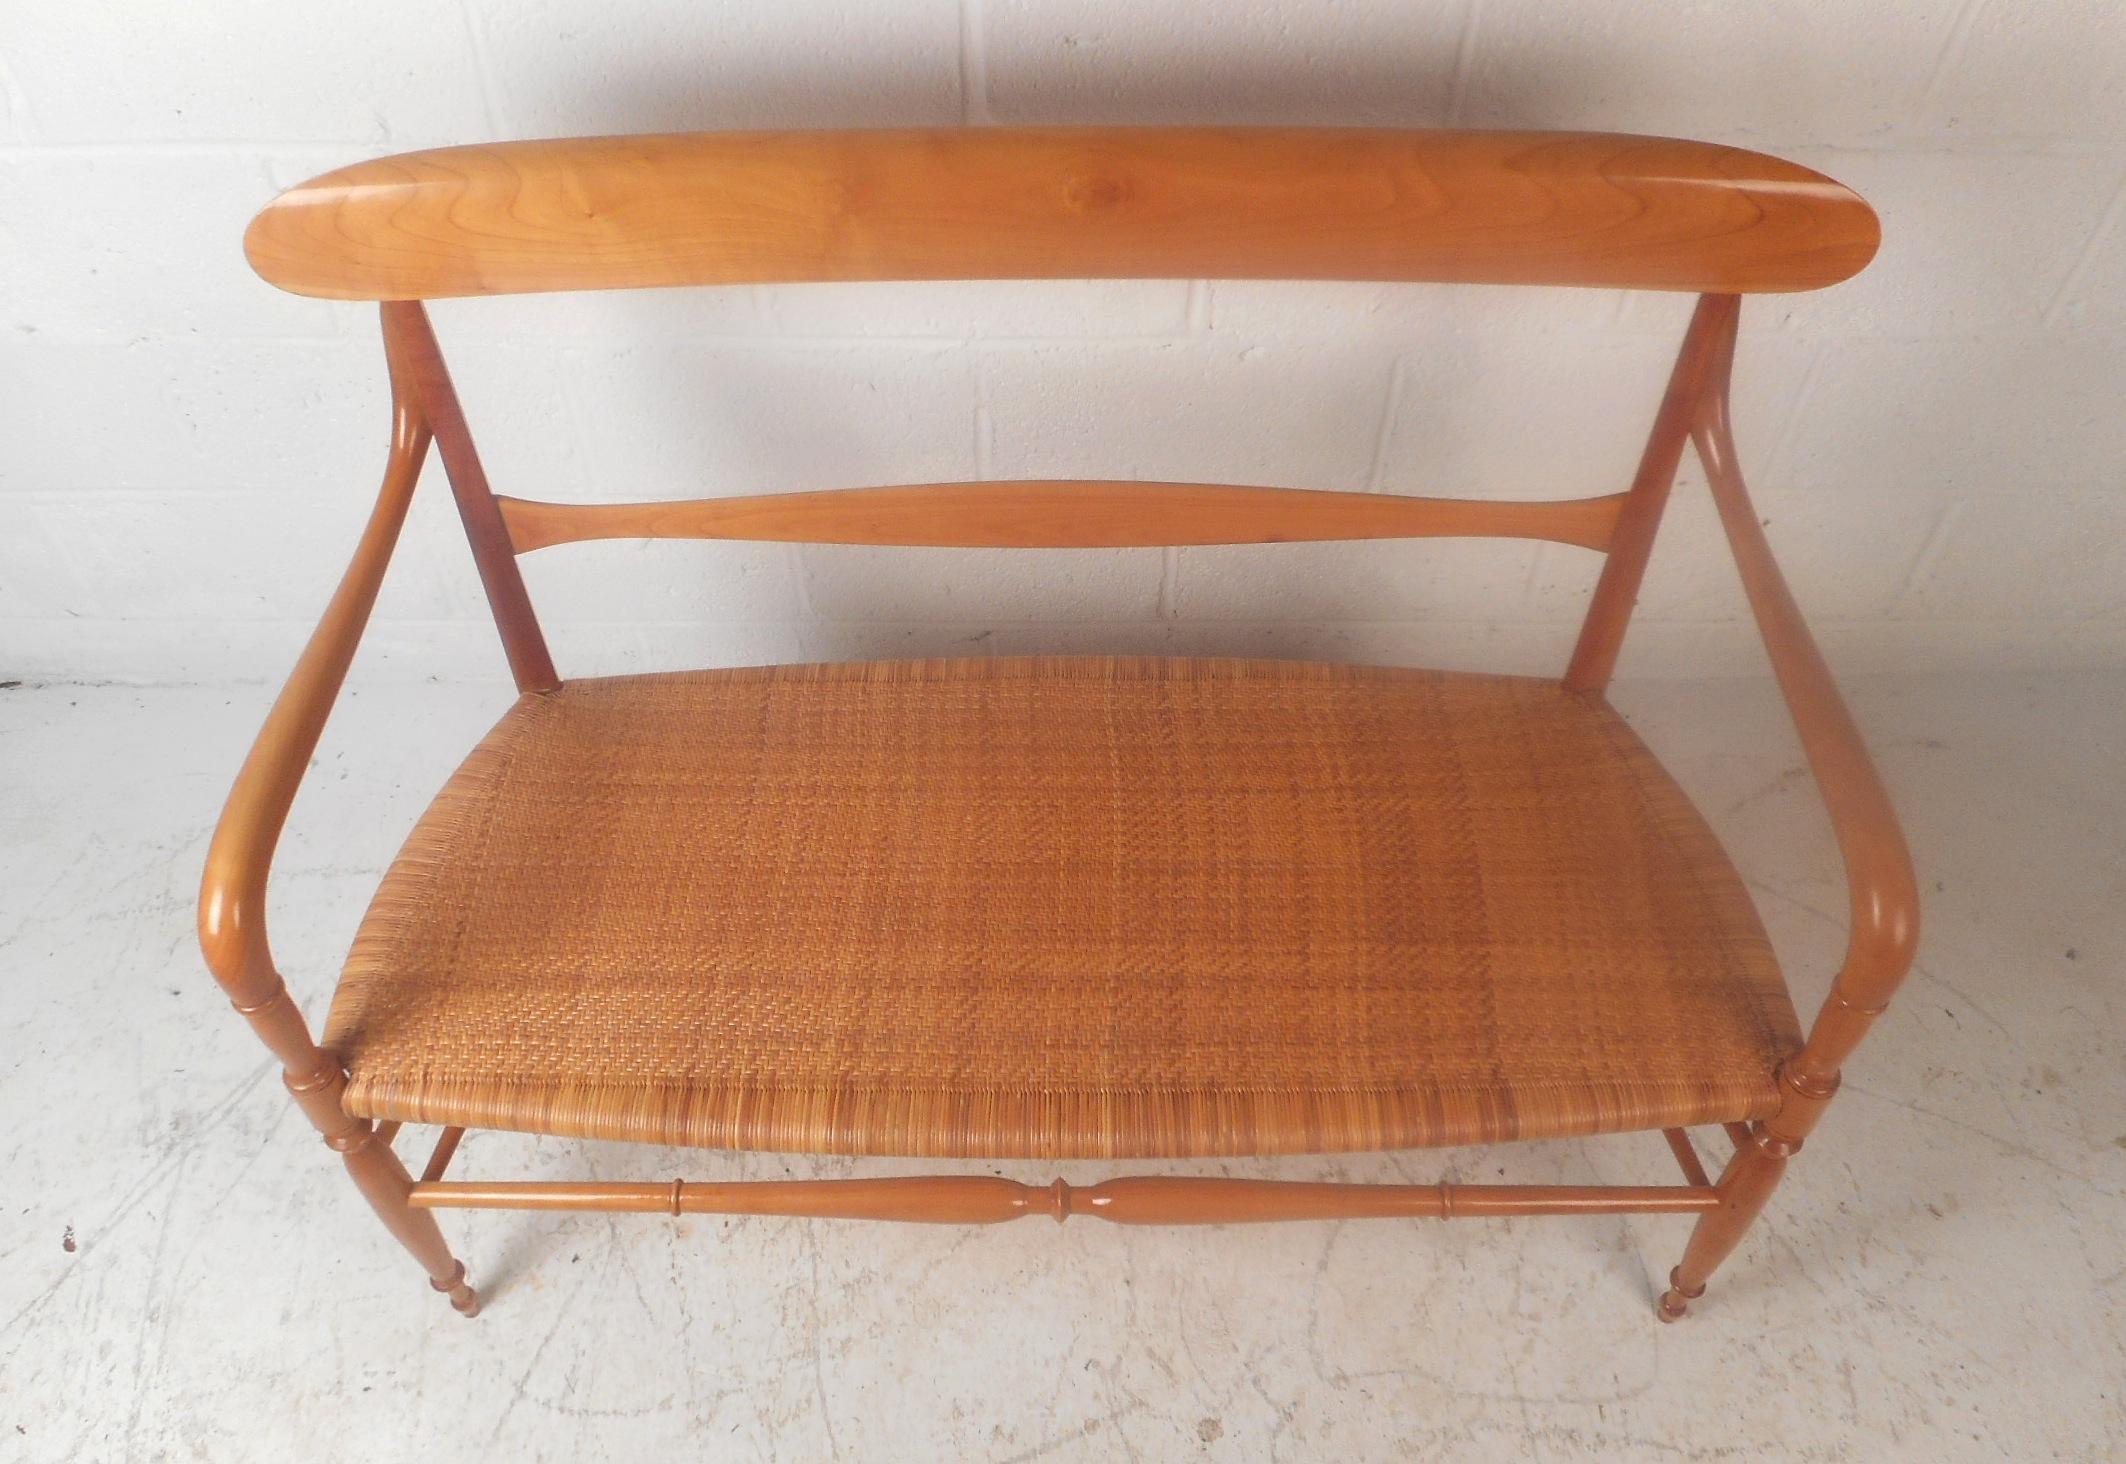 A wonderful vintage modern settee with a woven cane seat and a sculpted frame. The sleek design has a tightly woven cane seat ensuring a comfortable and sturdy place to sit. The carved stretchers, smooth curved arm rests, and tapered legs show true